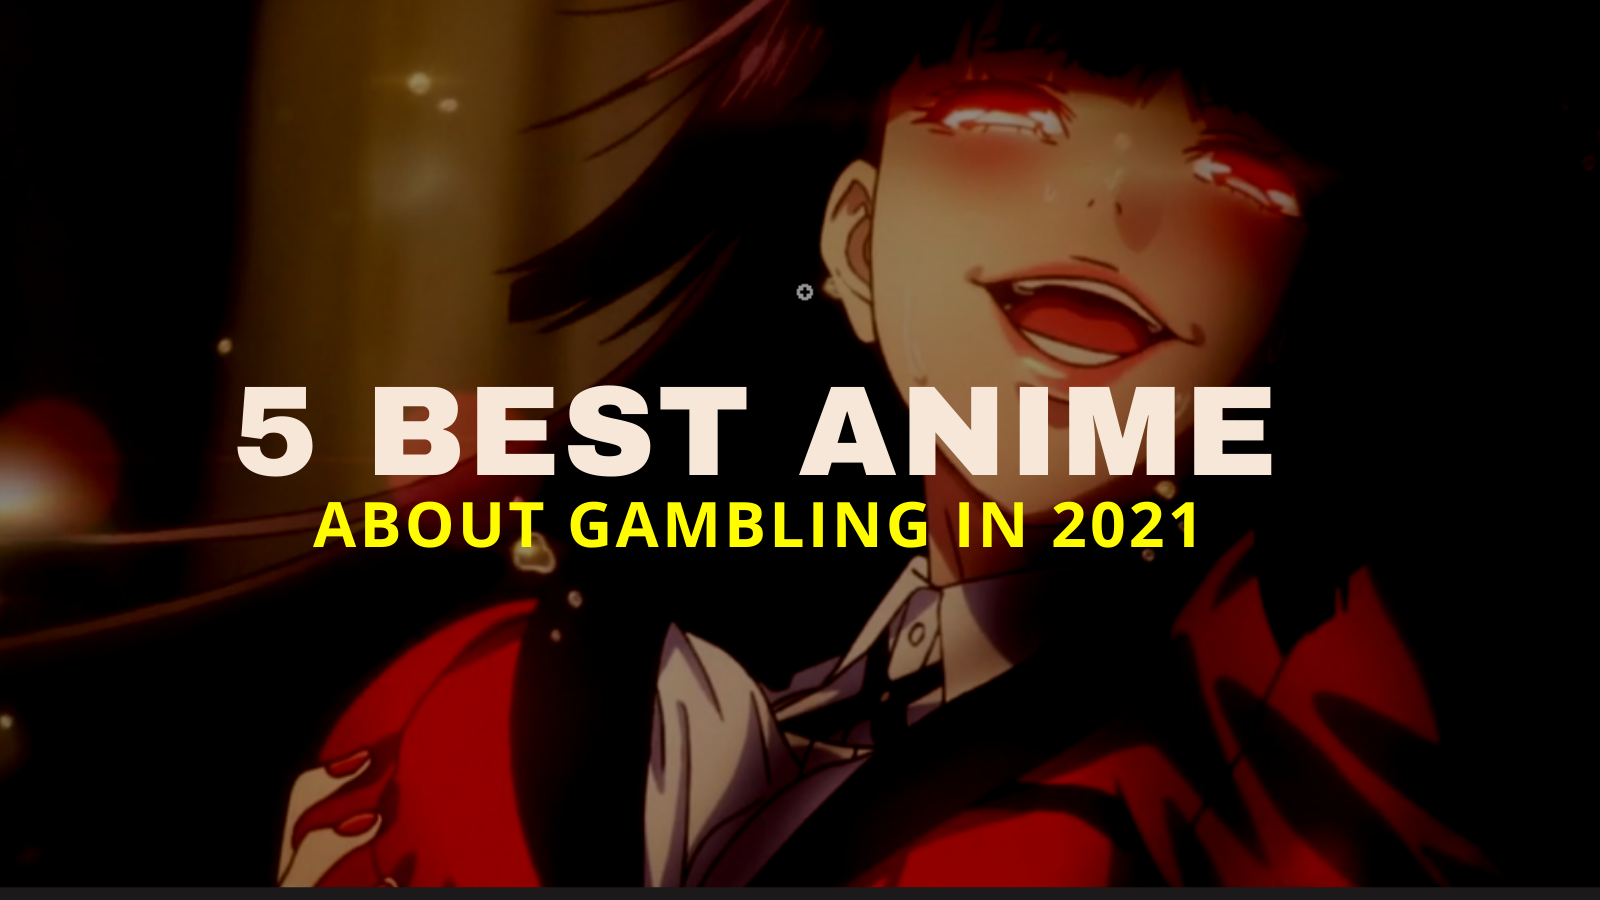 Read more about the article 5 Best Anime About Gambling That You Must Watch in 2021<div class="yasr-vv-stars-title-container"><div class='yasr-stars-title yasr-rater-stars'
                          id='yasr-visitor-votes-readonly-rater-cf6a3b9566c46'
                          data-rating='0'
                          data-rater-starsize='16'
                          data-rater-postid='2654'
                          data-rater-readonly='true'
                          data-readonly-attribute='true'
                      ></div><span class='yasr-stars-title-average'>0 (0)</span></div>